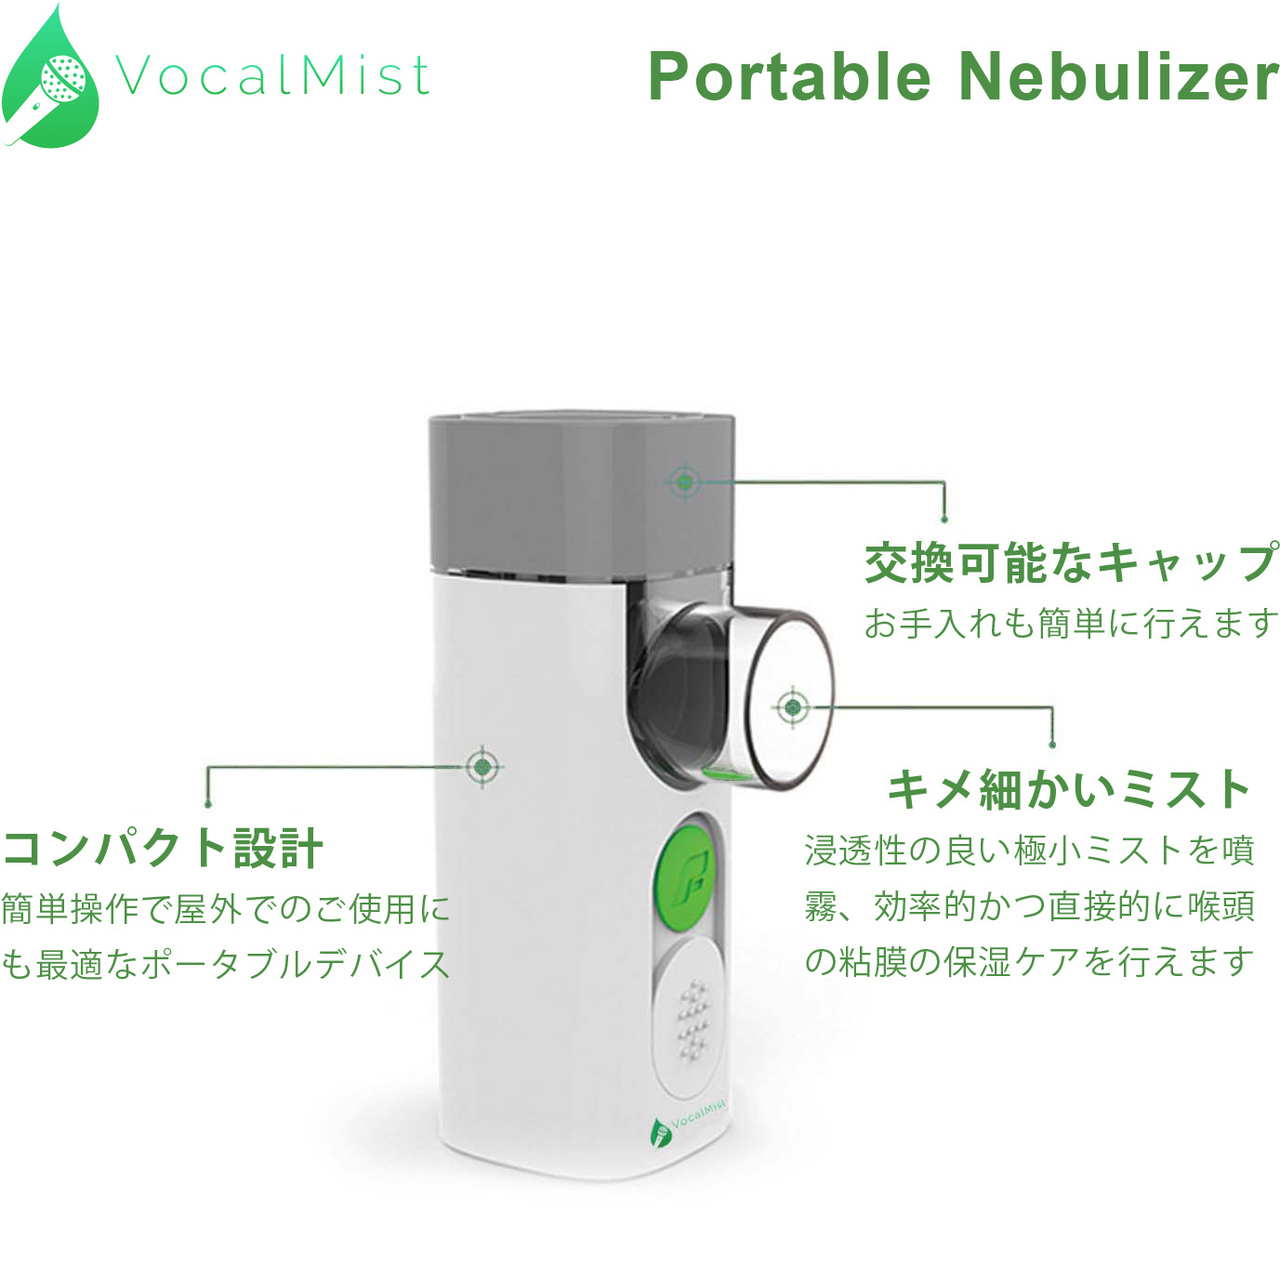 Vocal Mist Portable Nebulizer  ボーカルミスト新品